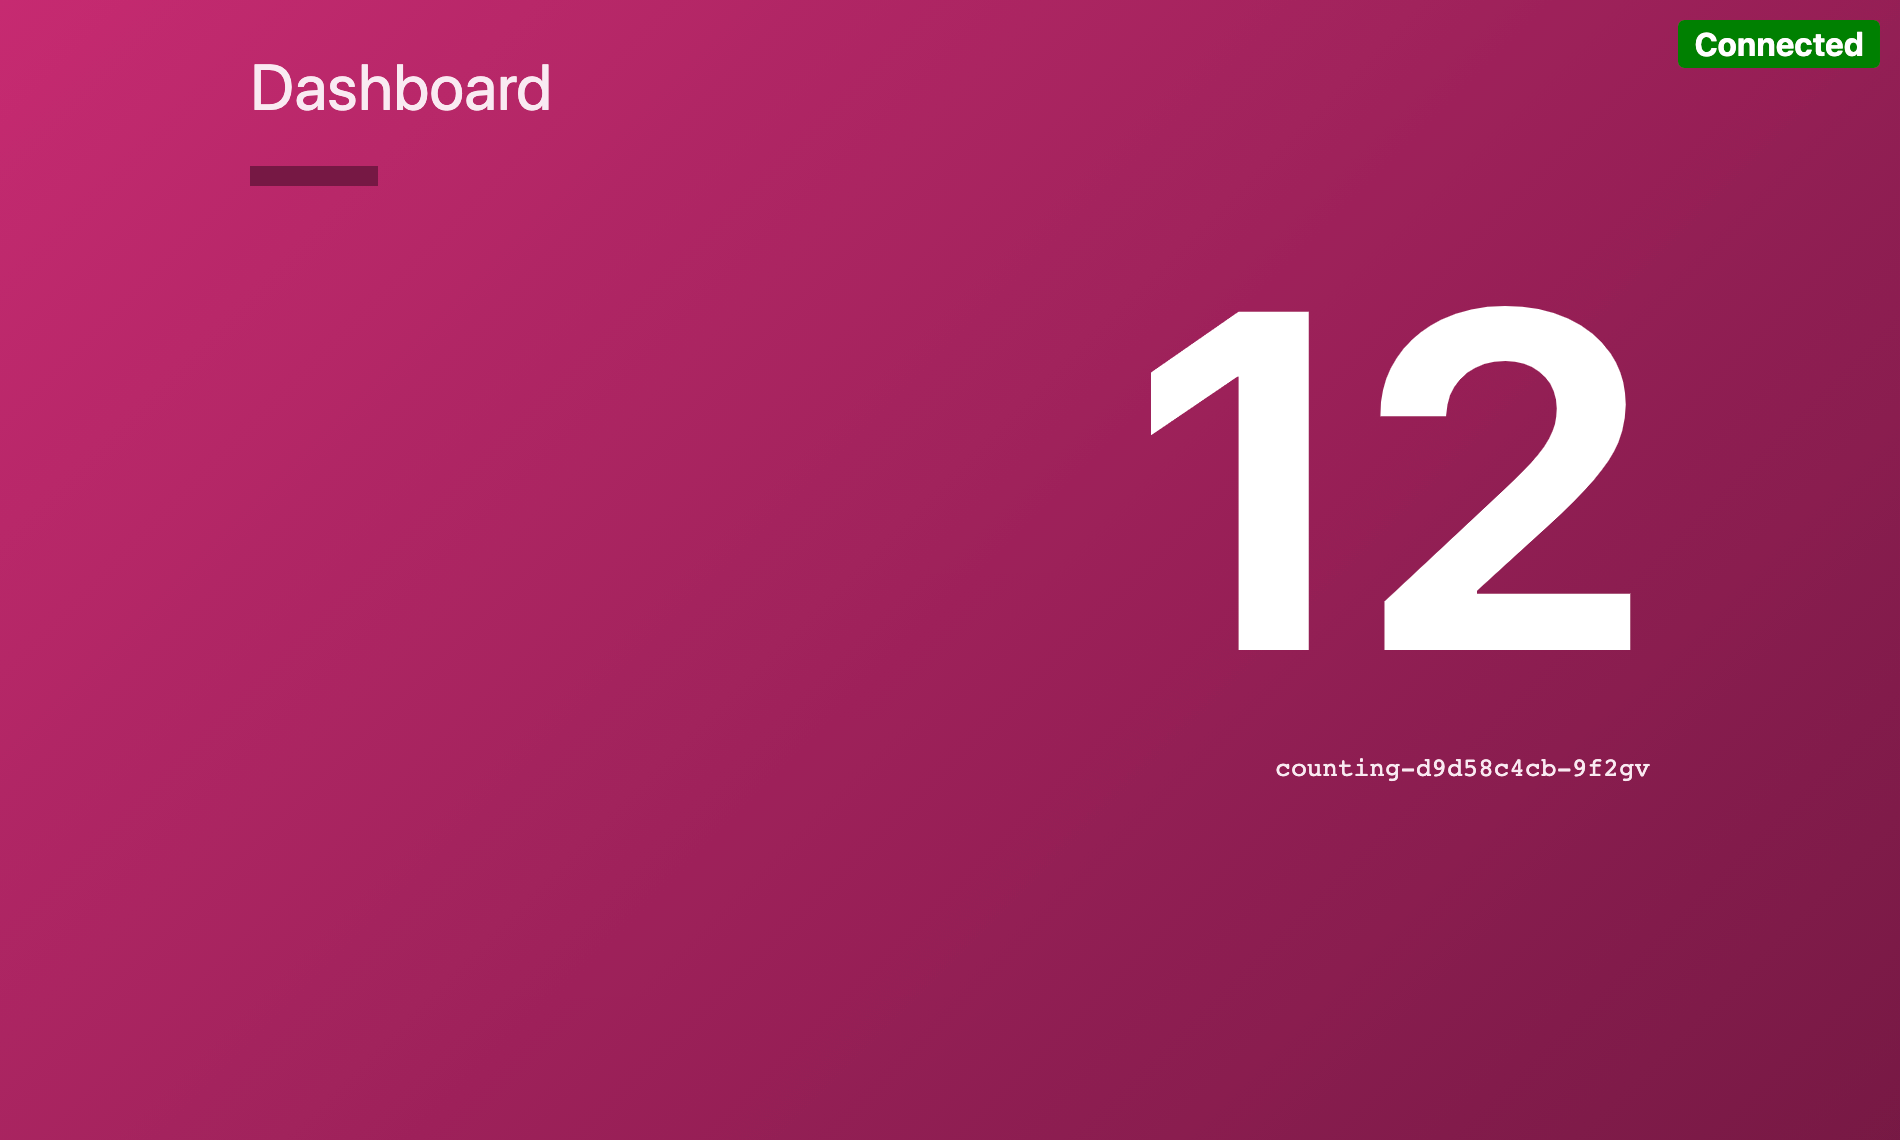 Dashboard showing live count